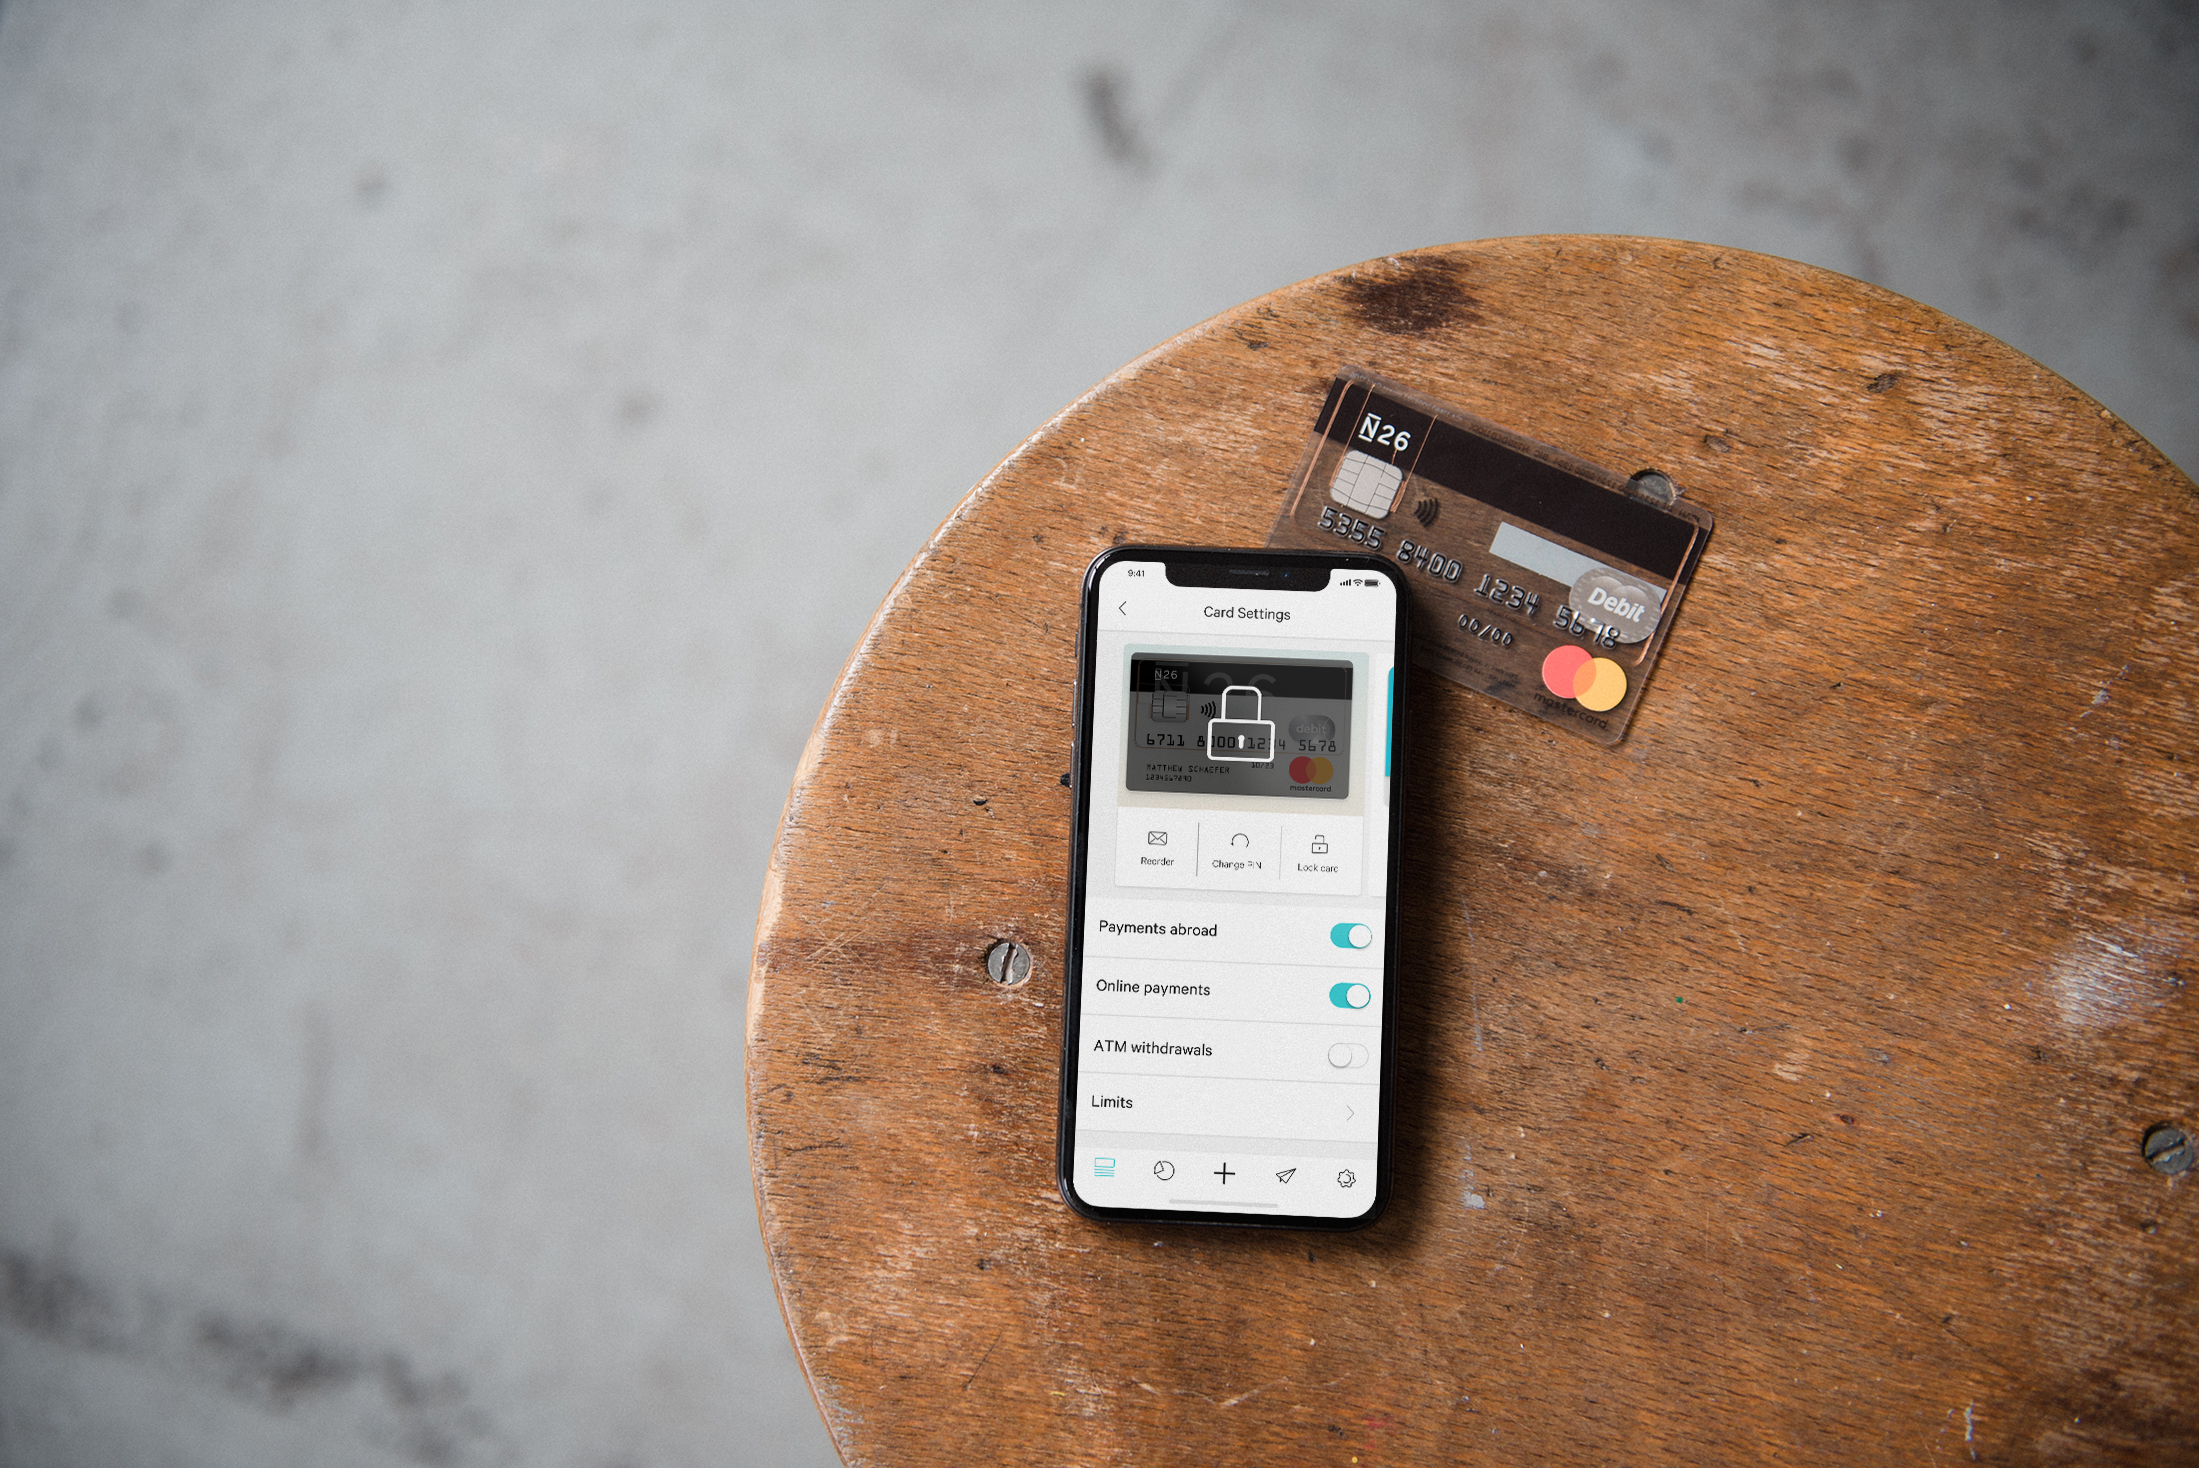 N26 Press Image with a phone showing the card settings section of the N26 app with a bank account card in the background. Both things are laying on a wooden table